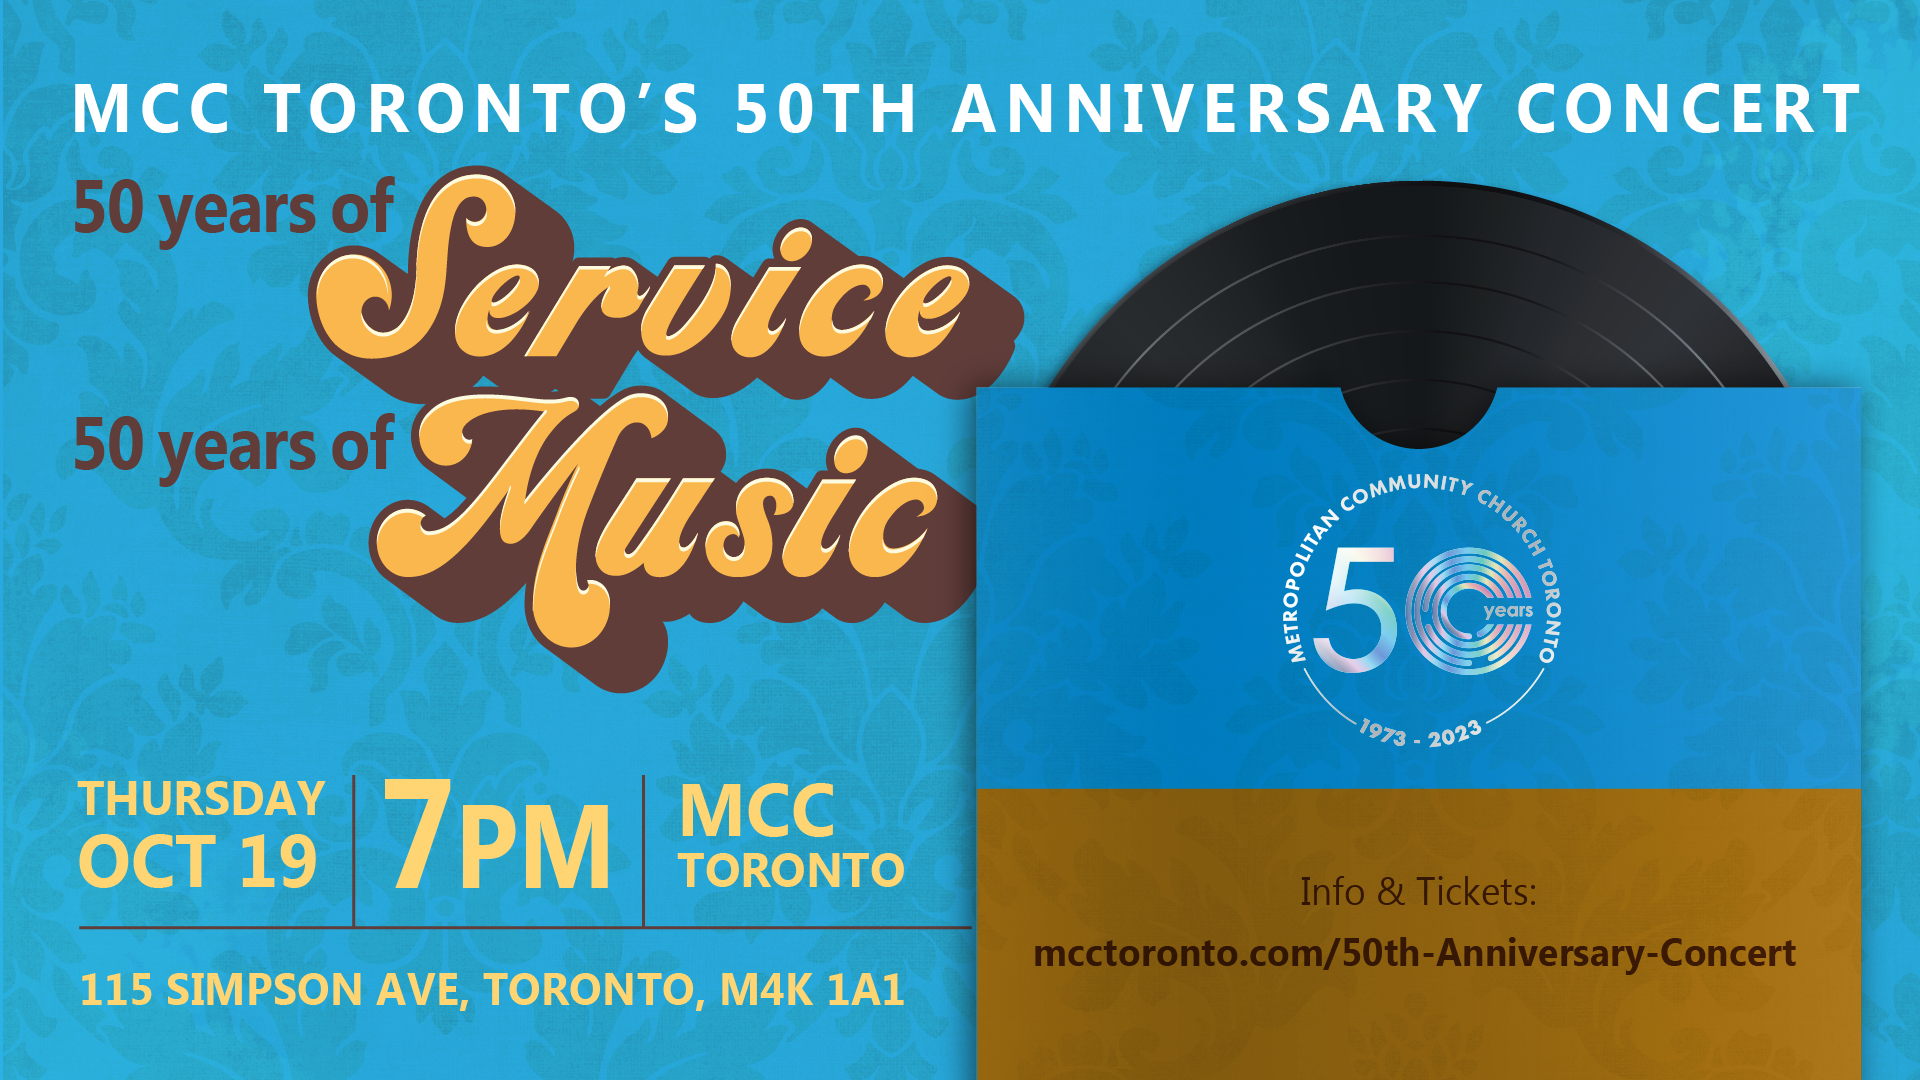 Picture of a vinyl record in a blue cover with MCC Toronto's 50th anniversary logo on the cover with text saying MCC Toronto's 50th Anniversary Concert. 50 years of Service . 50 years of Music. Thursday, October 19. 7 Pm. at MCC Toronto. Tix: mcctoronto.com